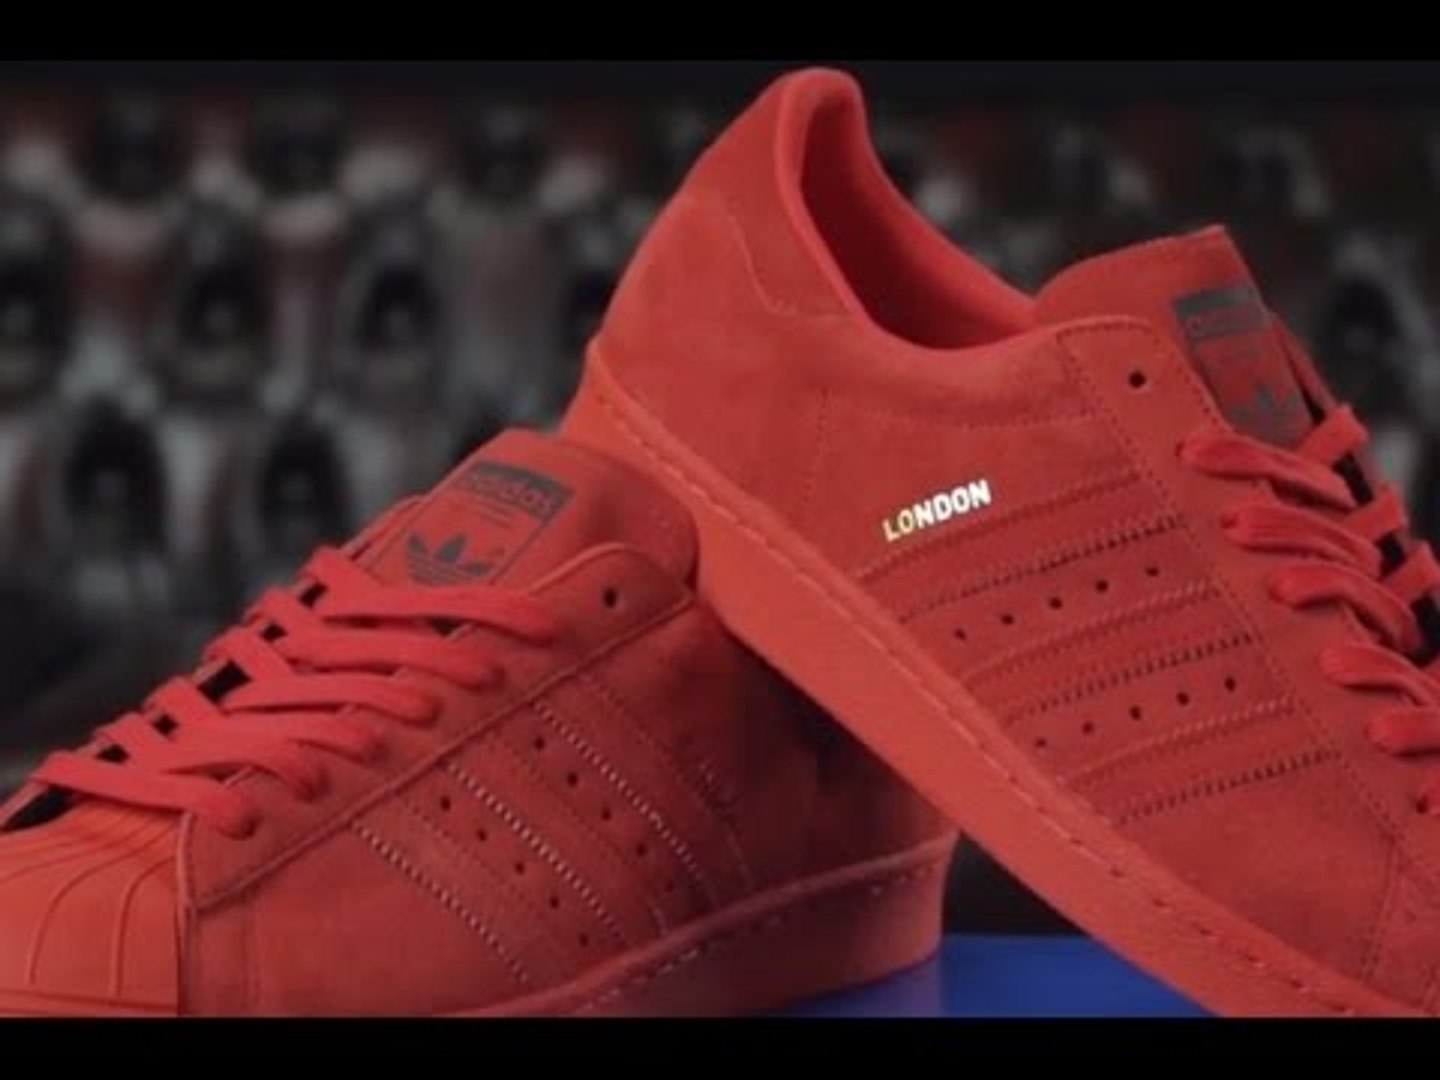 First Impressions of the Adidas Originals Superstar "City" Pack - video  Dailymotion